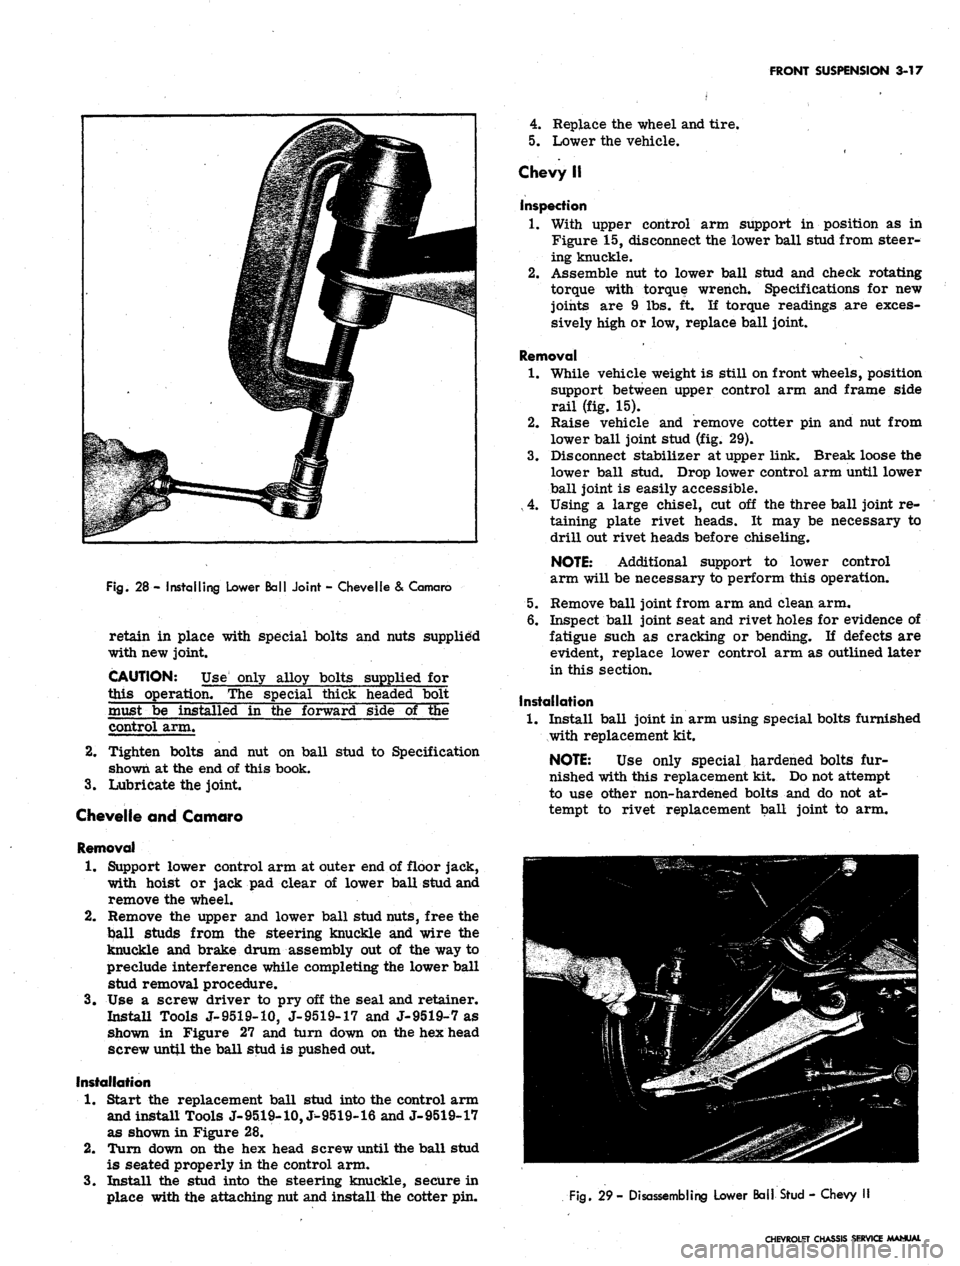 CHEVROLET CAMARO 1967 1.G Chassis Workshop Manual 
FRONT SUSPENSION 3-17

4.
 Replace the wheel and tire.

5.
 Lower the vehicle.

Chevy II

inspection

Fig.
 28 - Installing Lower Ball Joint - Chevelle & Camaro

retain in place with special bolts an